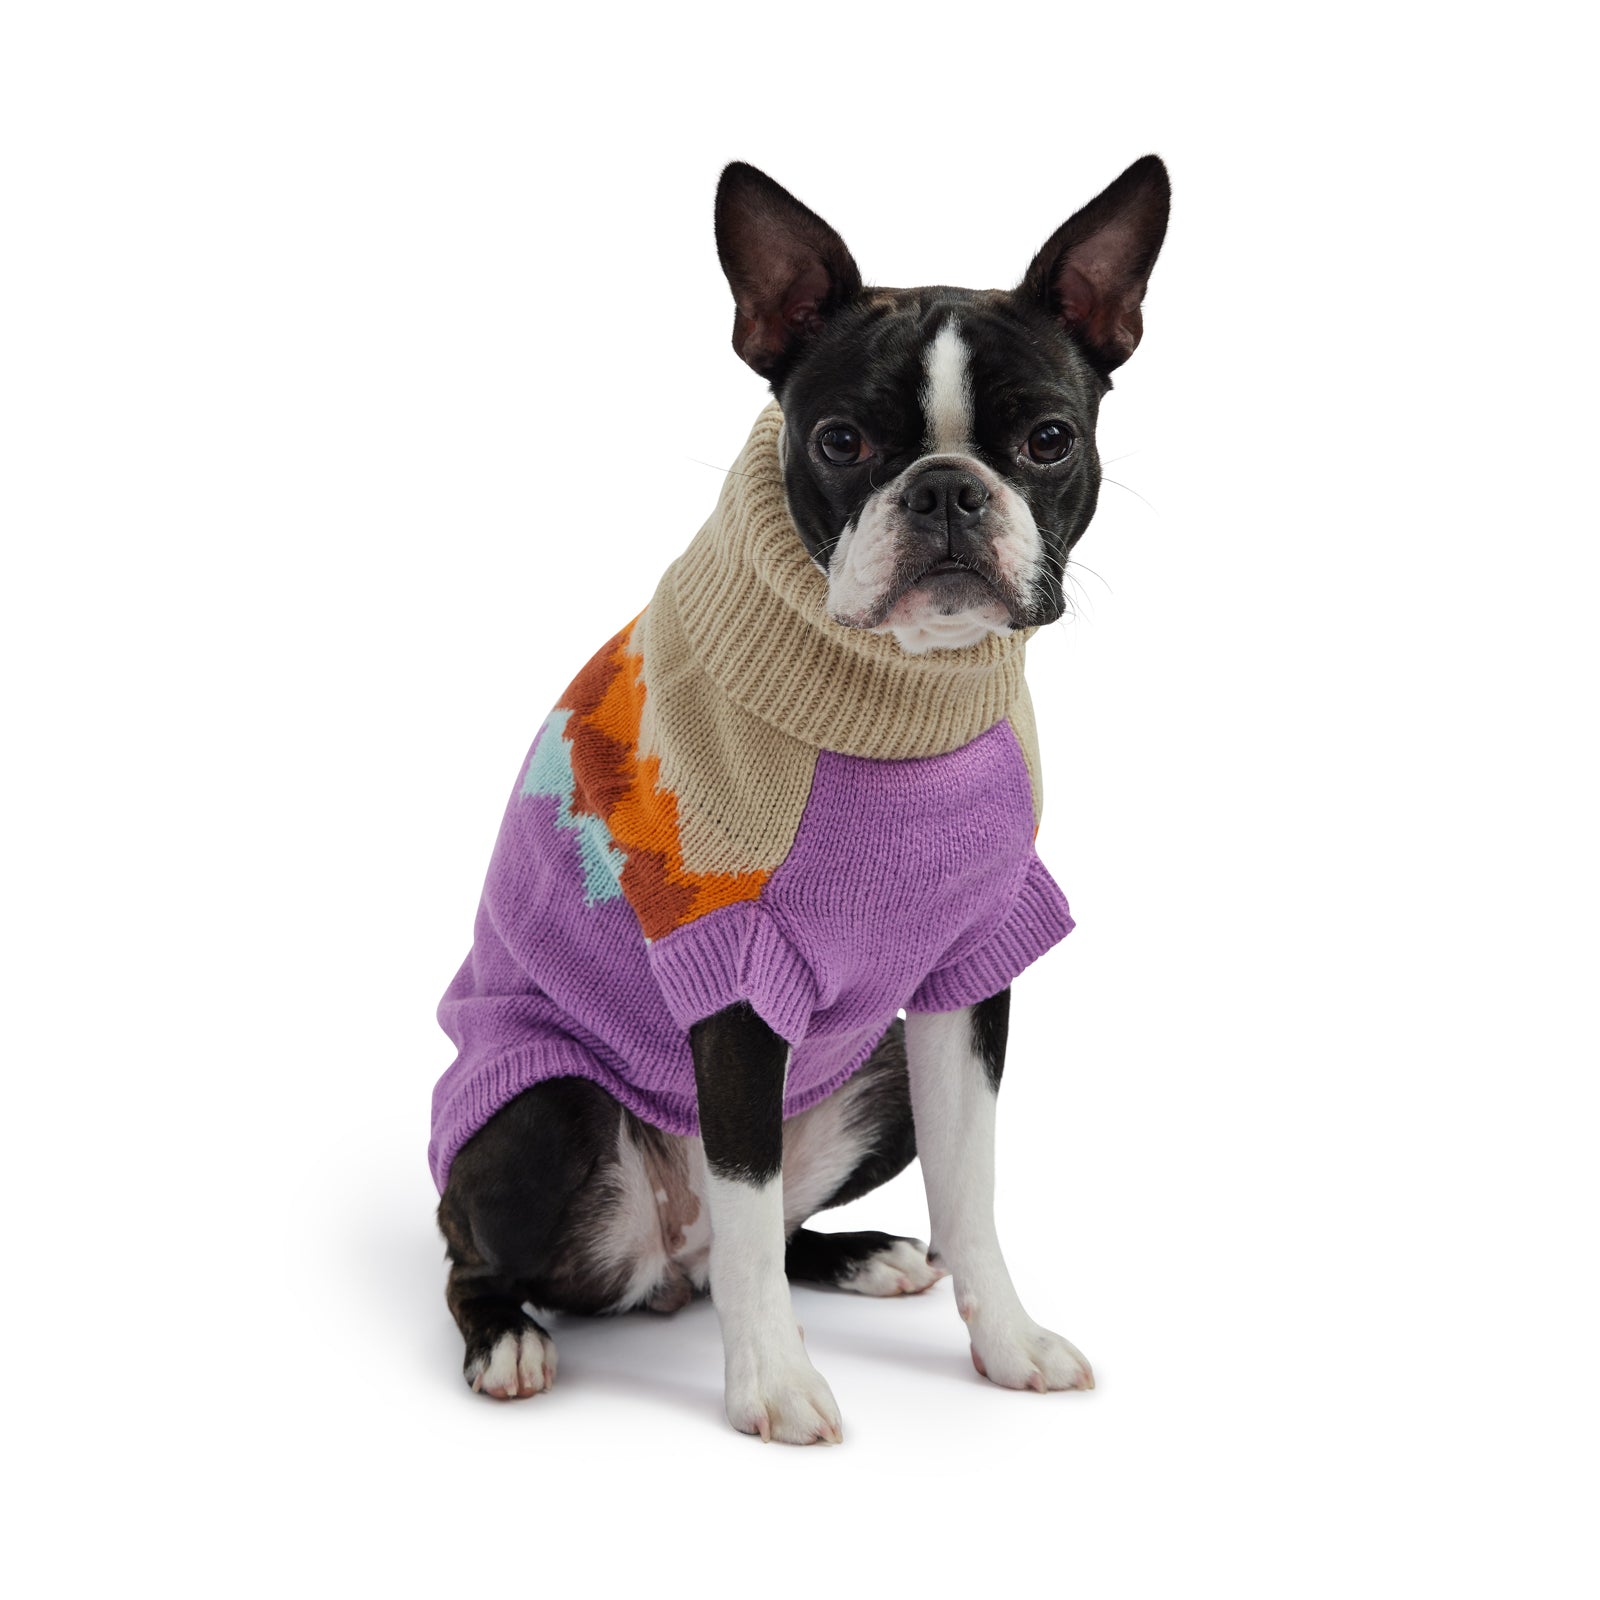 a black and white boston terrier seated, wearing a purple and beige dog sweater with colorful mountain peaks graphic